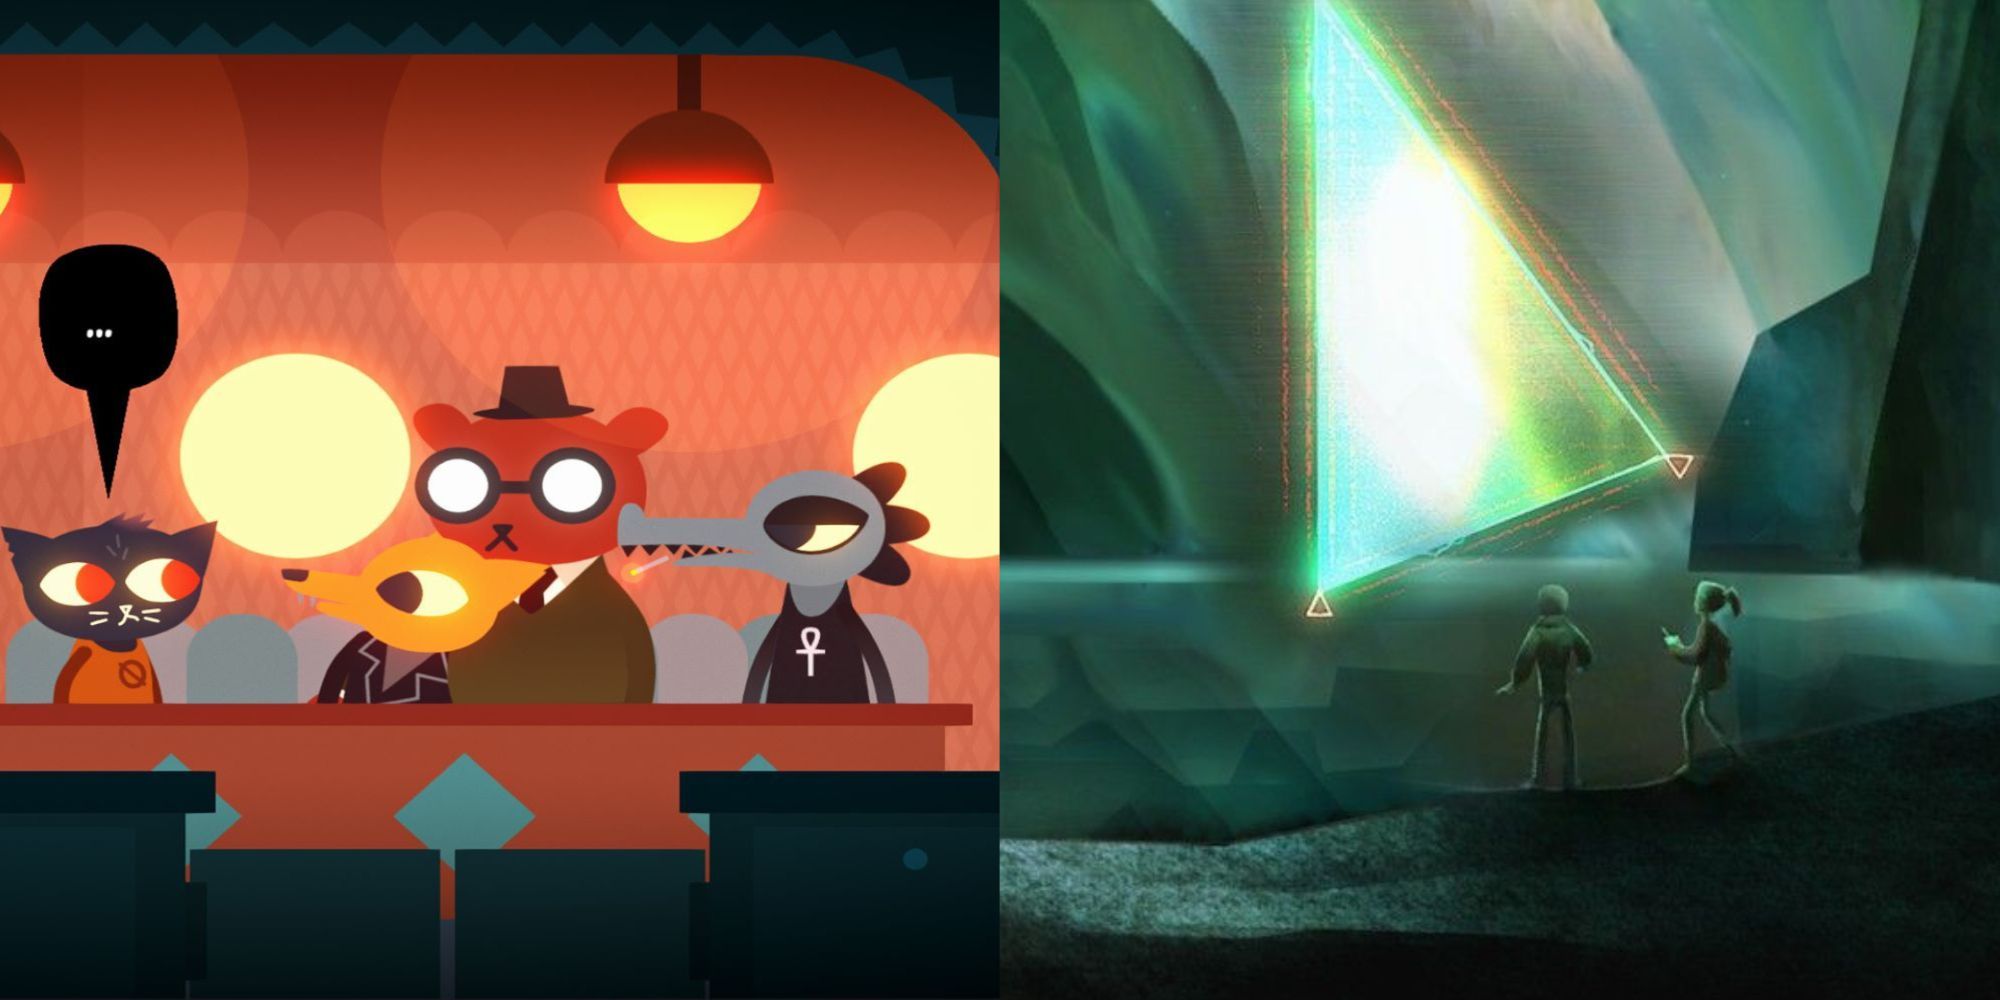 Split image of Mae conversing with her friends in Night in the Woods and the title art for Oxenfree showcasing the interdimensional rift.